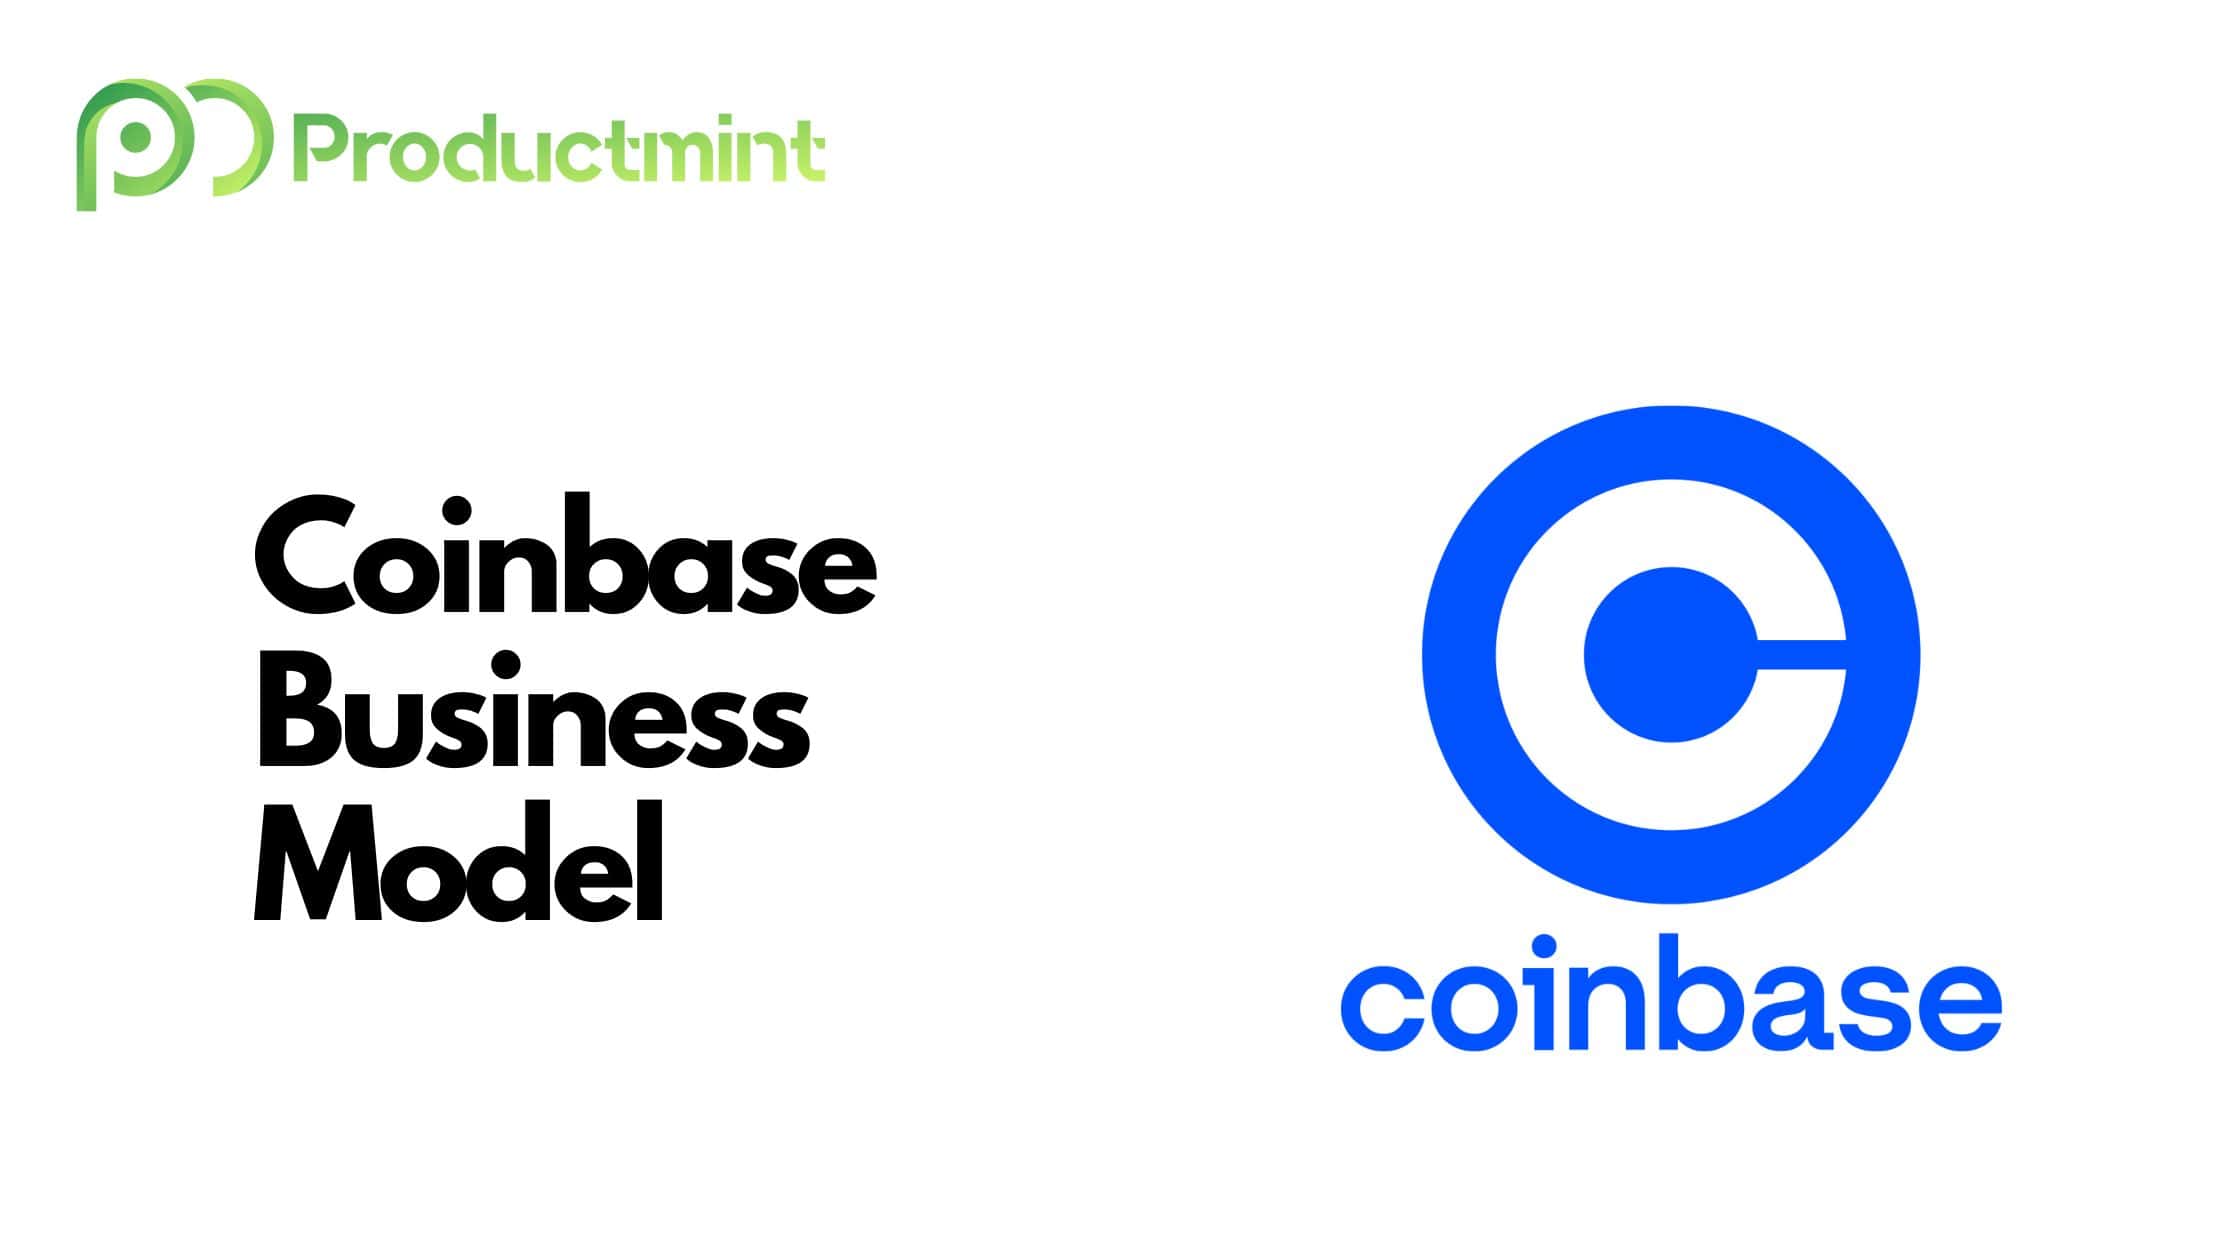 Coinbase Business Model